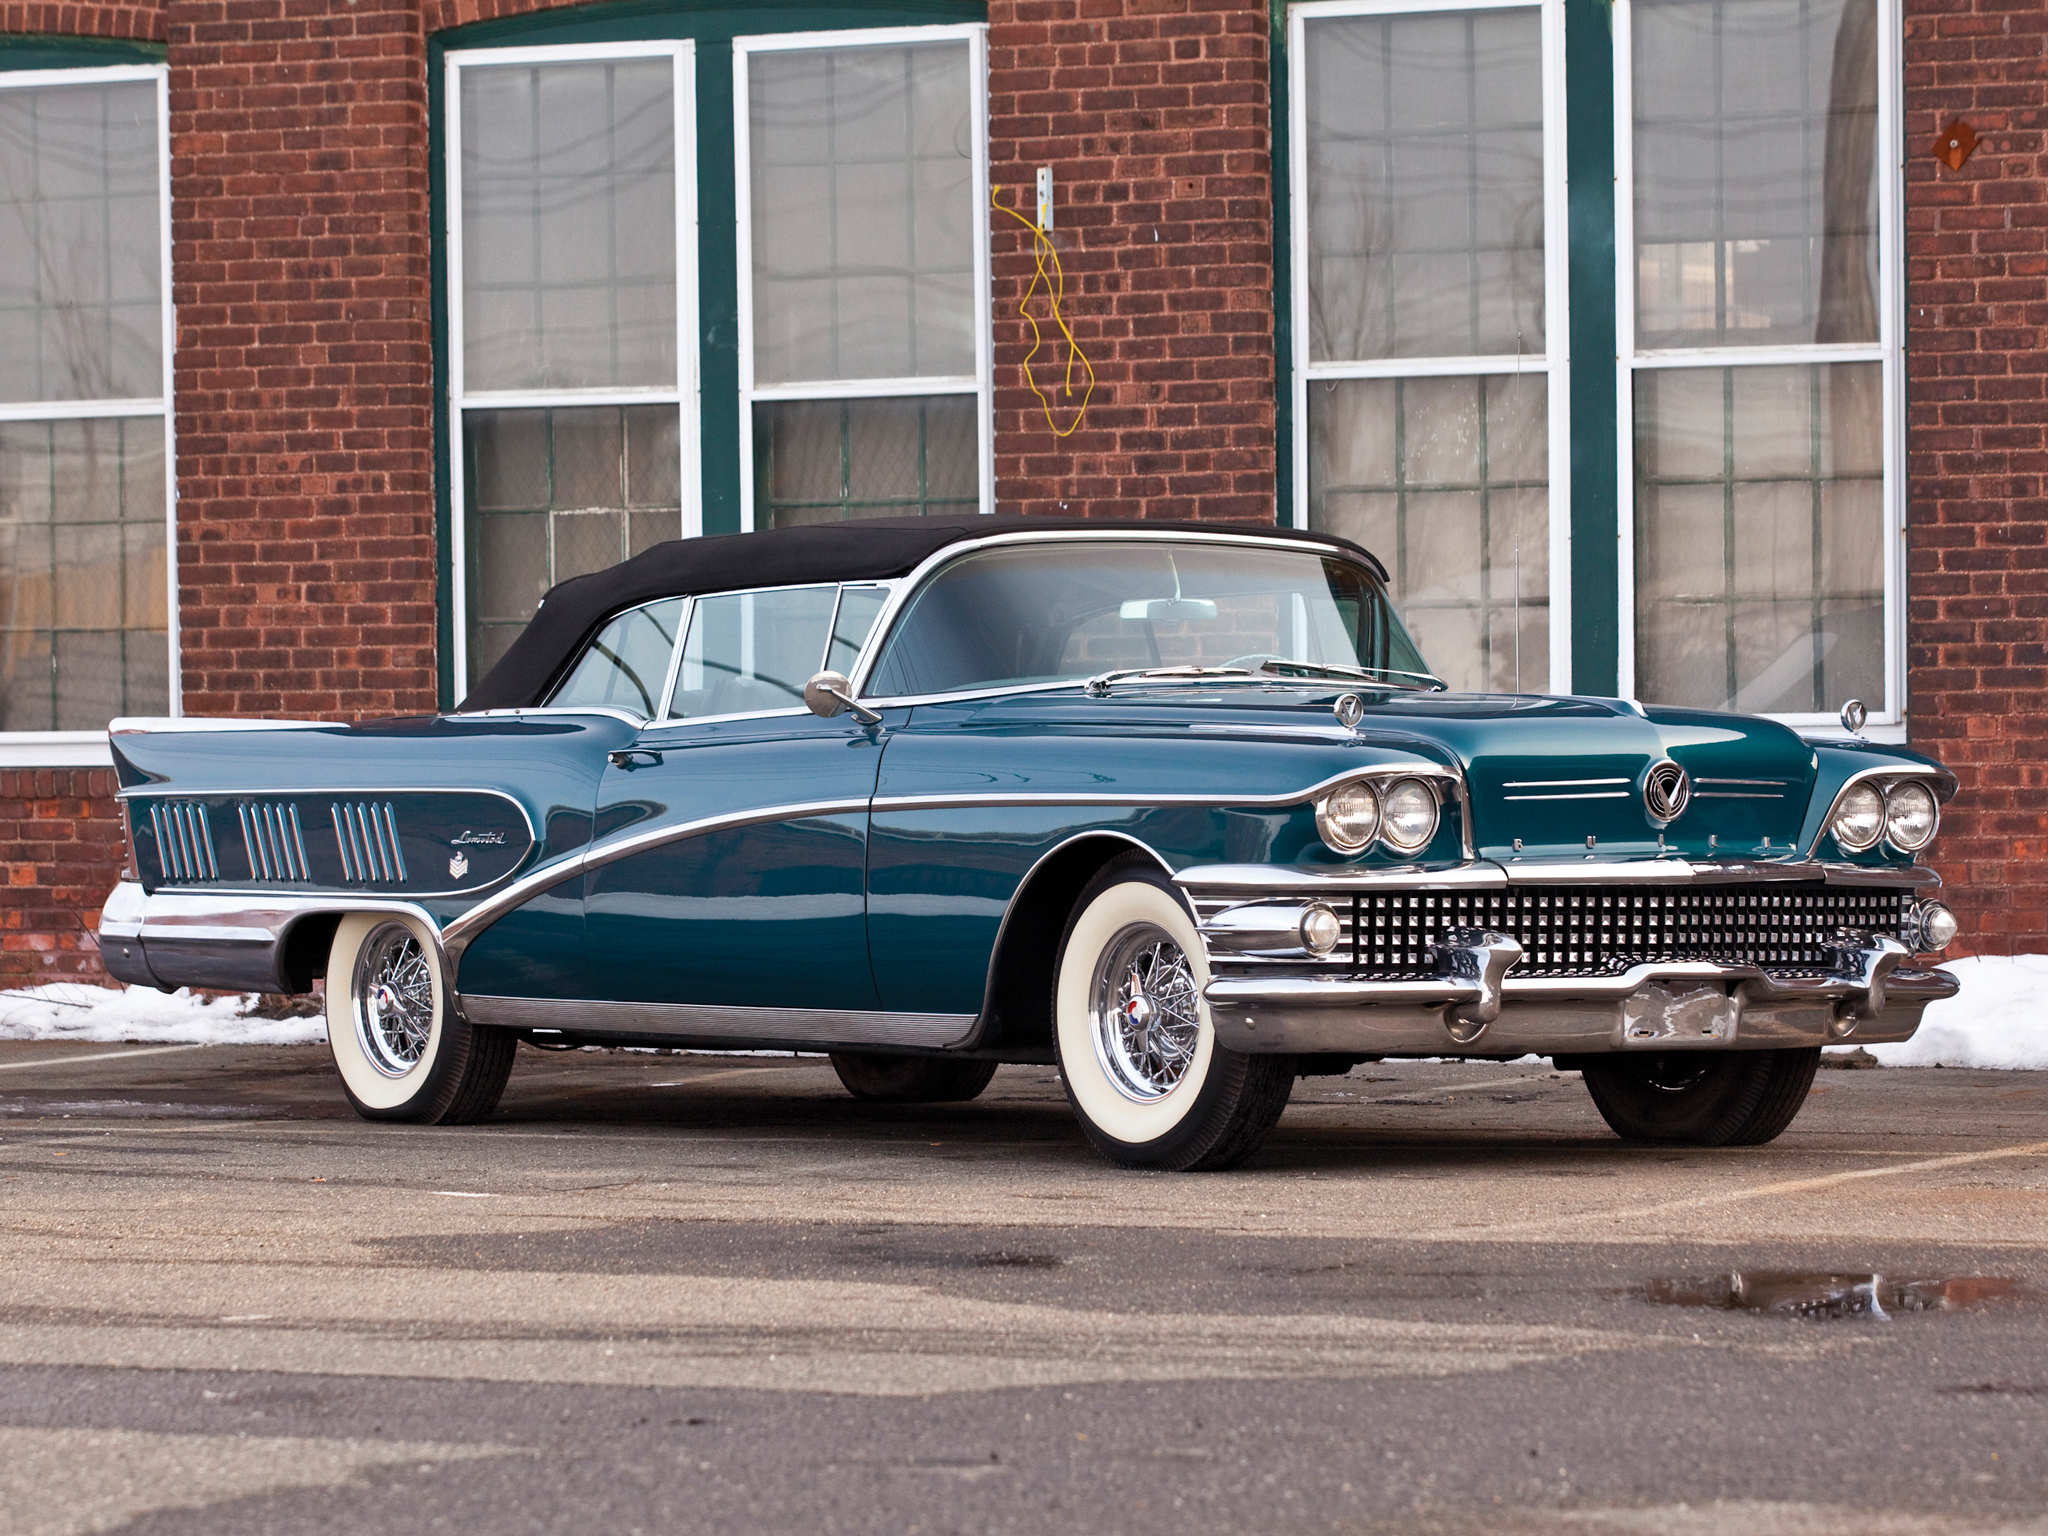 1958, Buick, Limited, Convertible,  756 4867x , Luxury, Retro, Gs Wallpaper